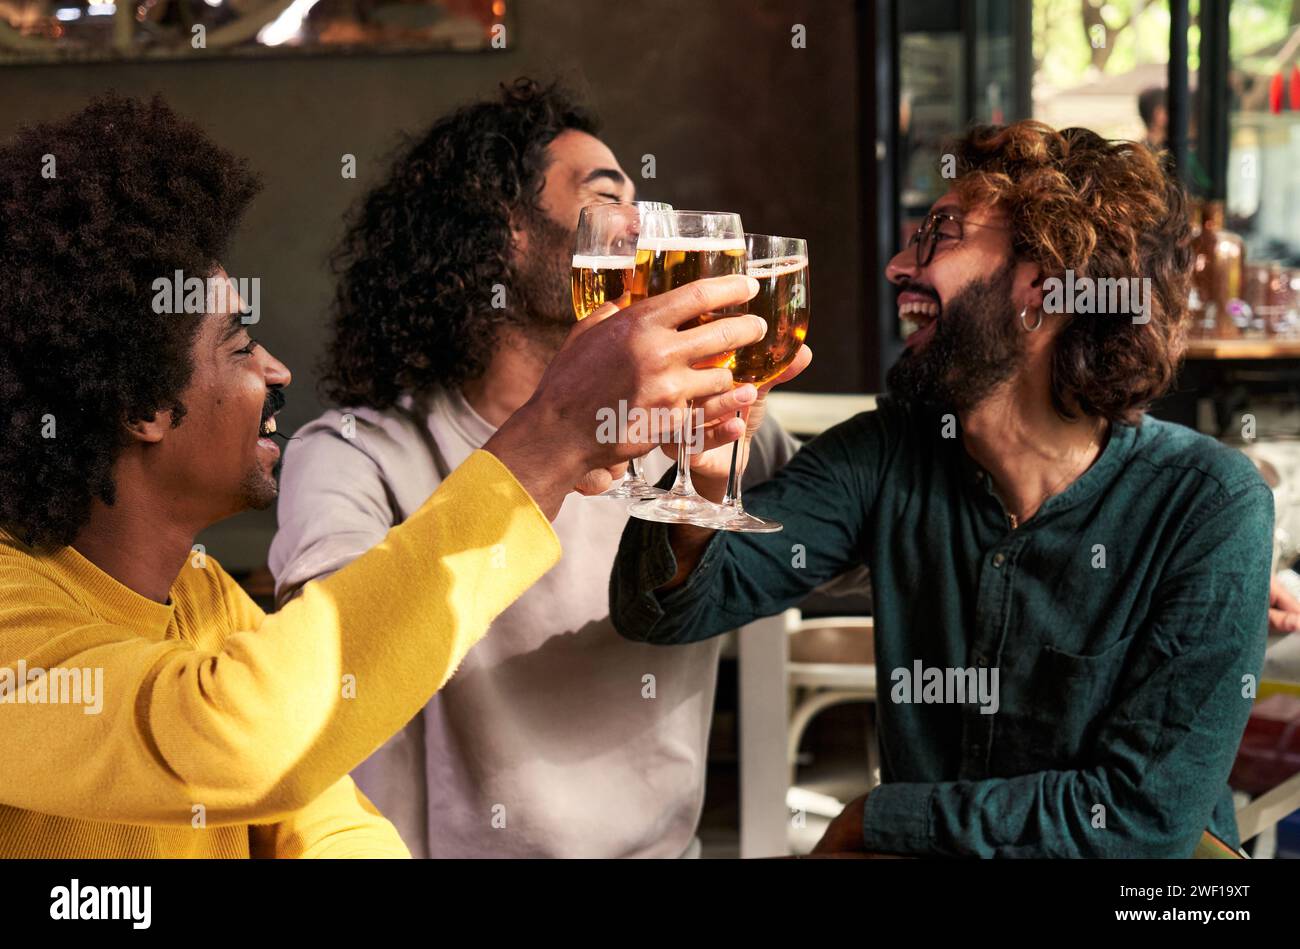 Small group of multiracial male friends toasting with beers together in a bar. Stock Photo